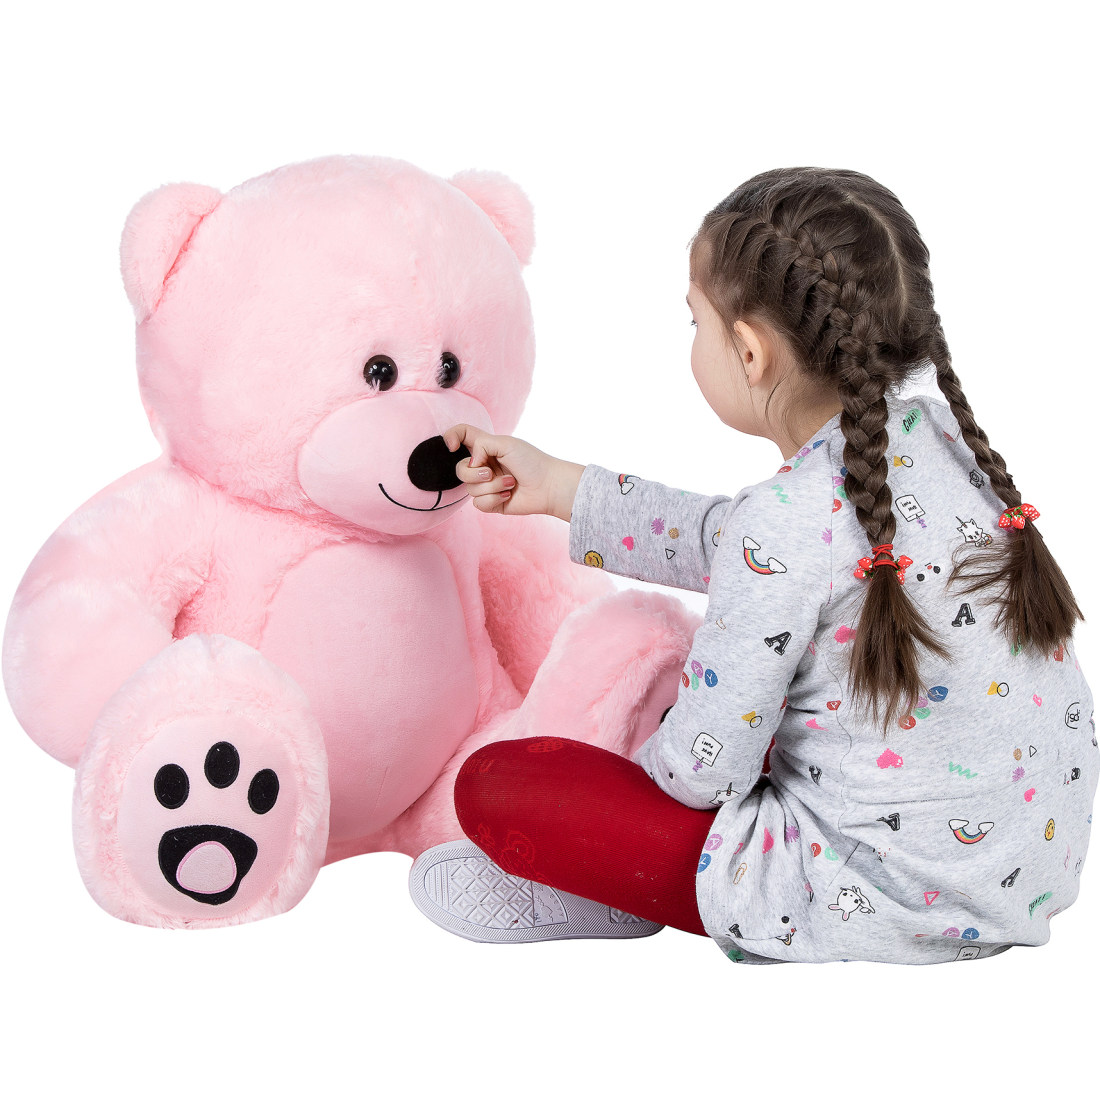 Buy YunNasi Giant Teddy Bear Gift for Christmas or Birthday or Wedding or  Other Holidays (80 cm, Light Brown) Online at Low Prices in India -  Amazon.in